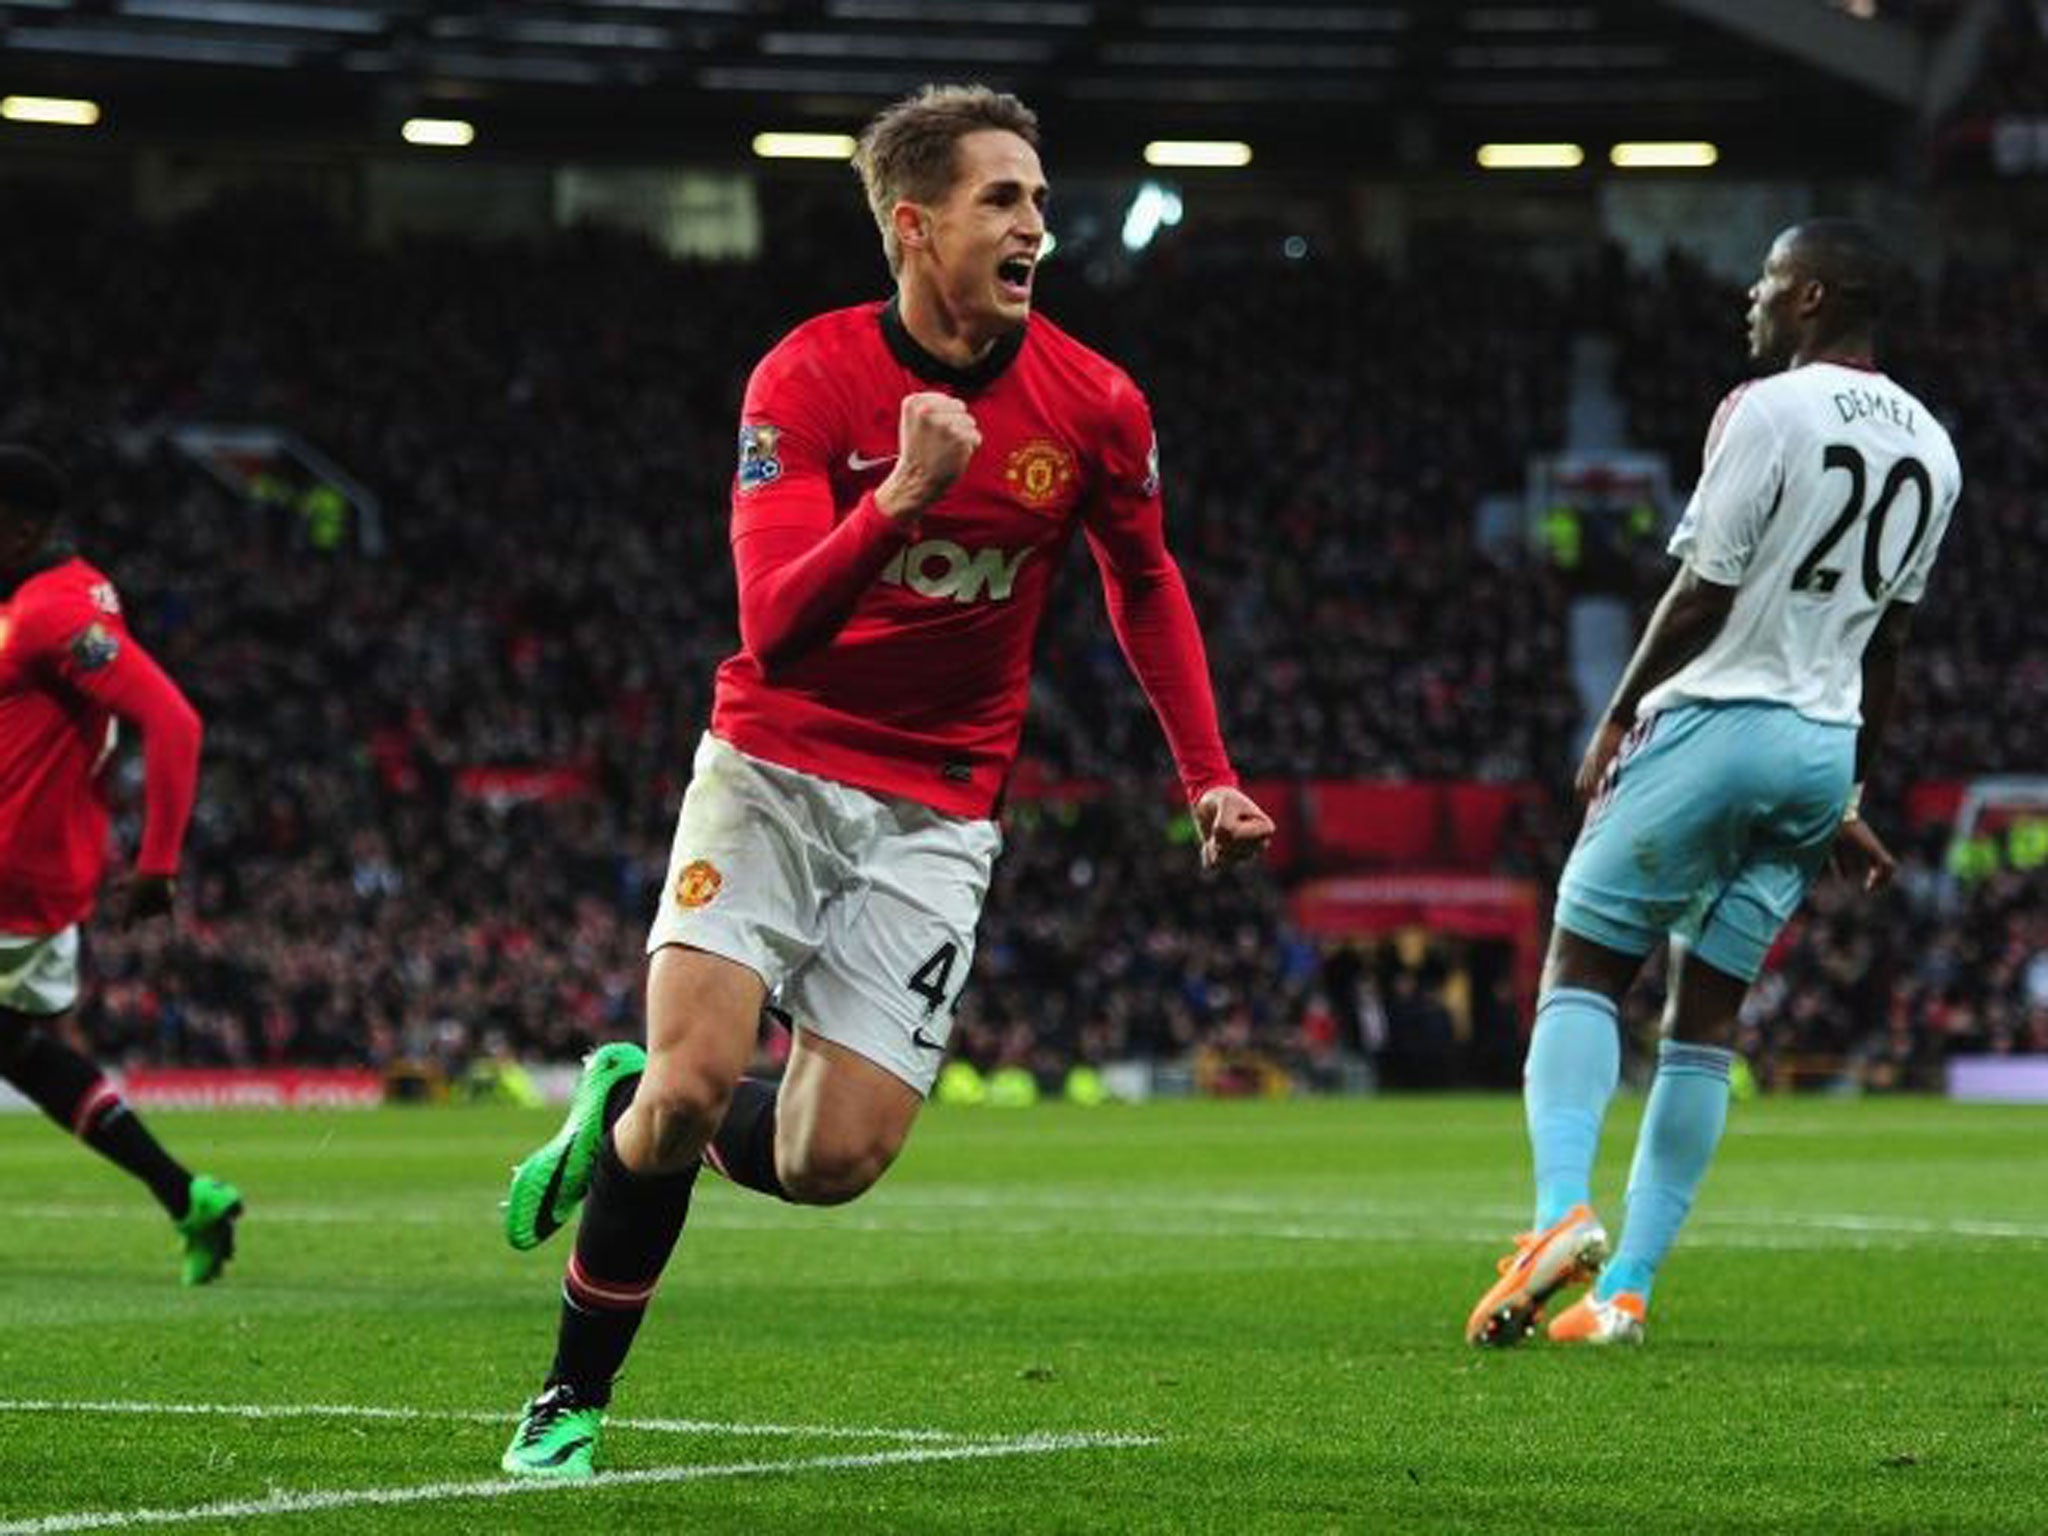 Mourinho’s words will at the very least place further focus on the 18-year-old Belgium-born winger Adnan Januzaj